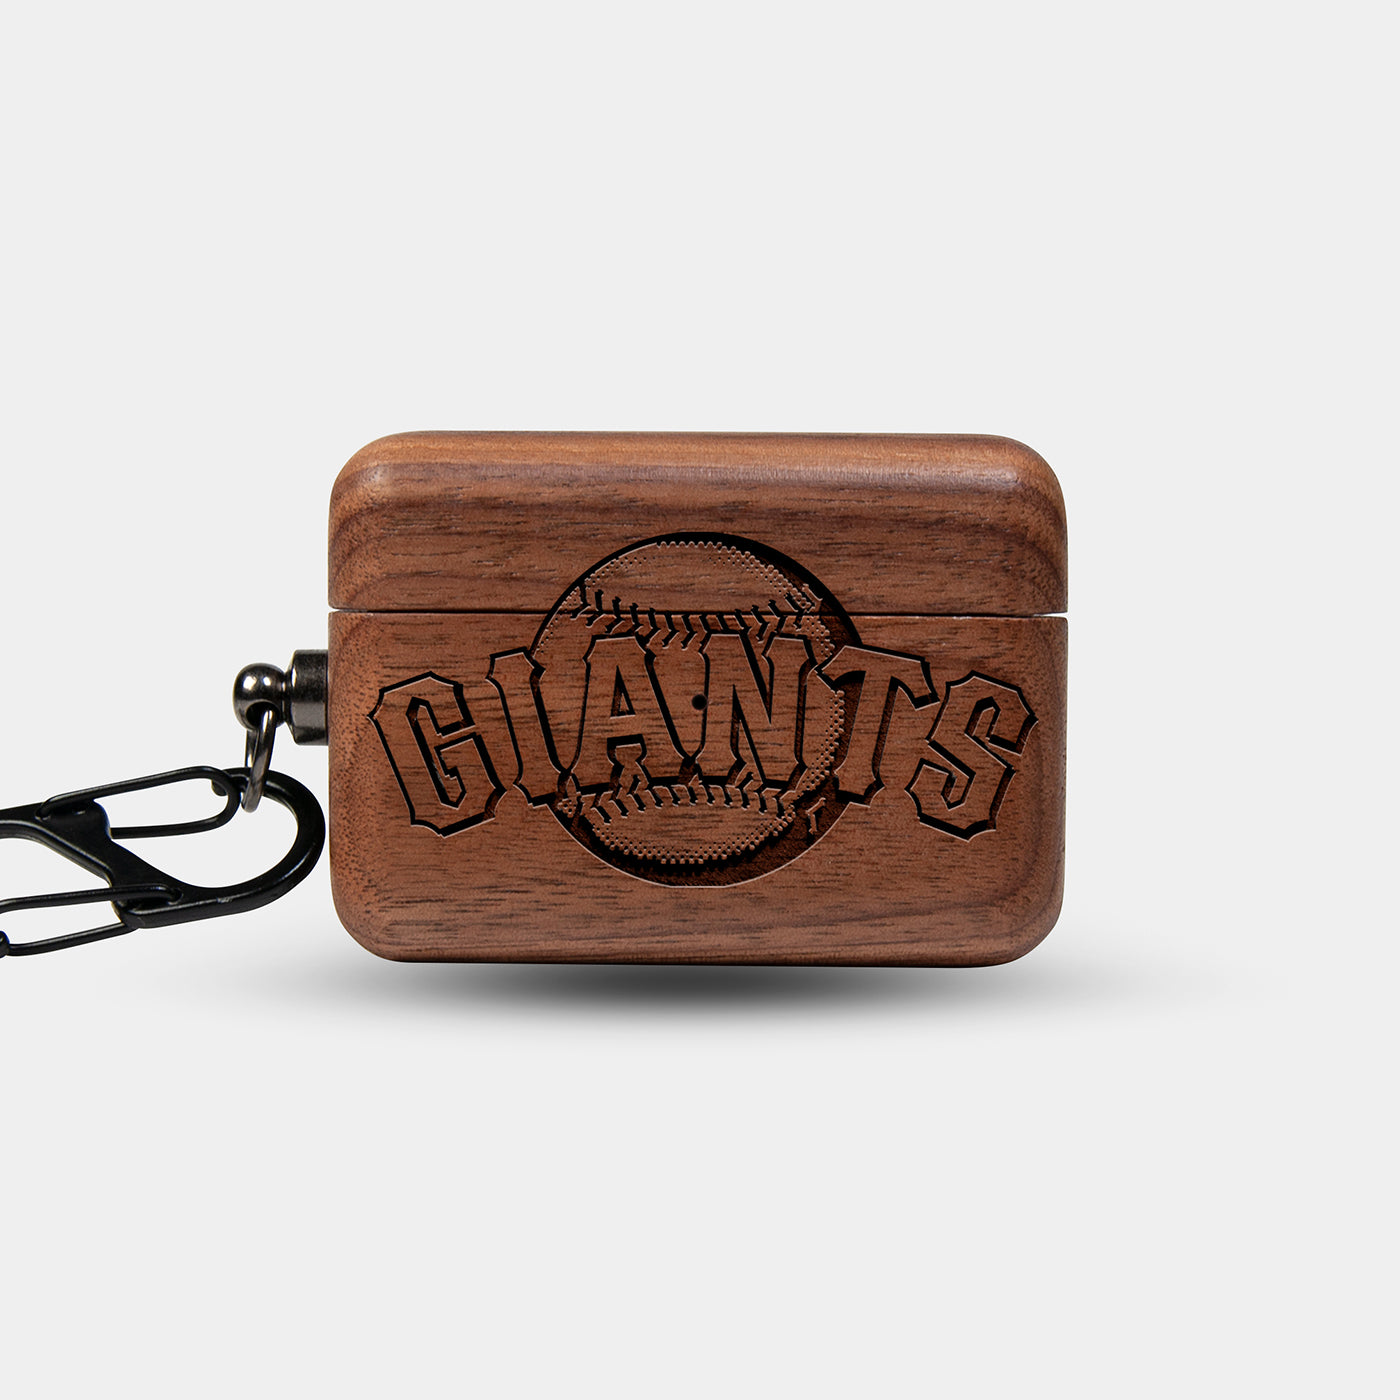 Custom San Francisco Giants AirPods Cases | AirPods | AirPods Pro | AirPods Pro 2 Case - Carved Wood Giants AirPods Cover - Eco-friendly San Francisco Giants AirPods Case - Custom San Francisco Giants Gift For Him - Monogrammed Personalized AirPods Cover By Engraved In Nature